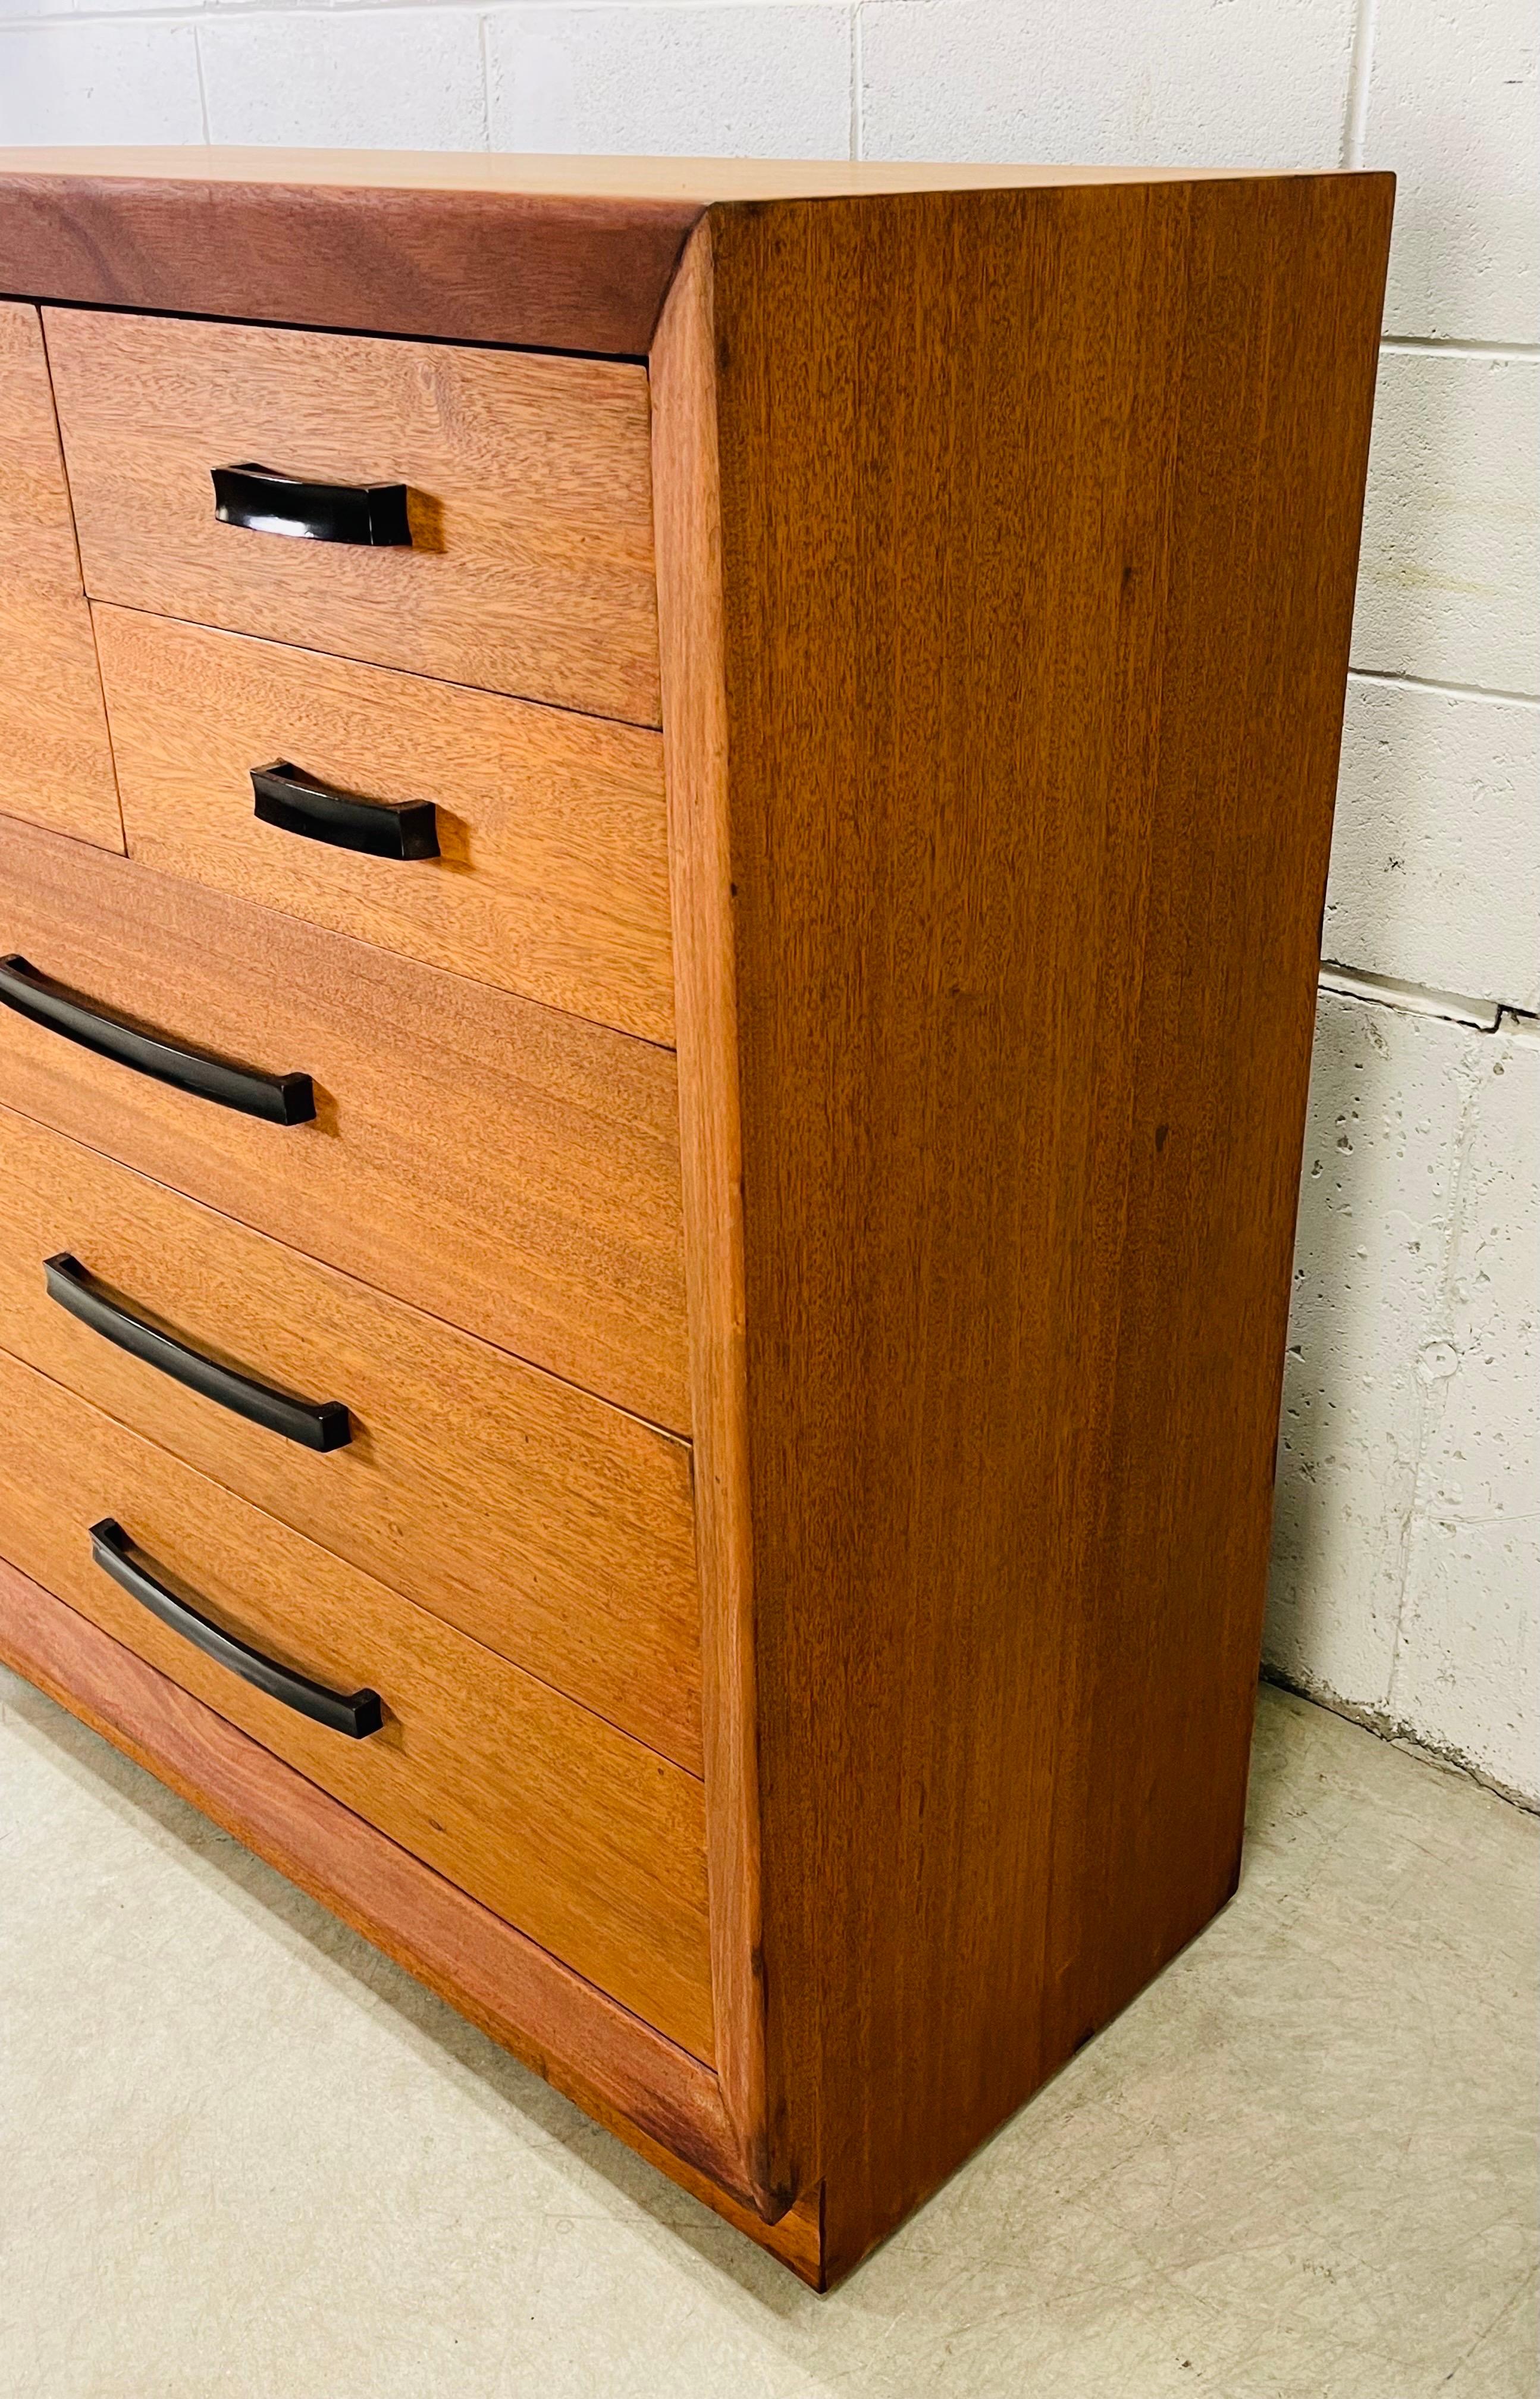 1950s John Stuart Teak Wood Tall Dresser In Good Condition For Sale In Amherst, NH